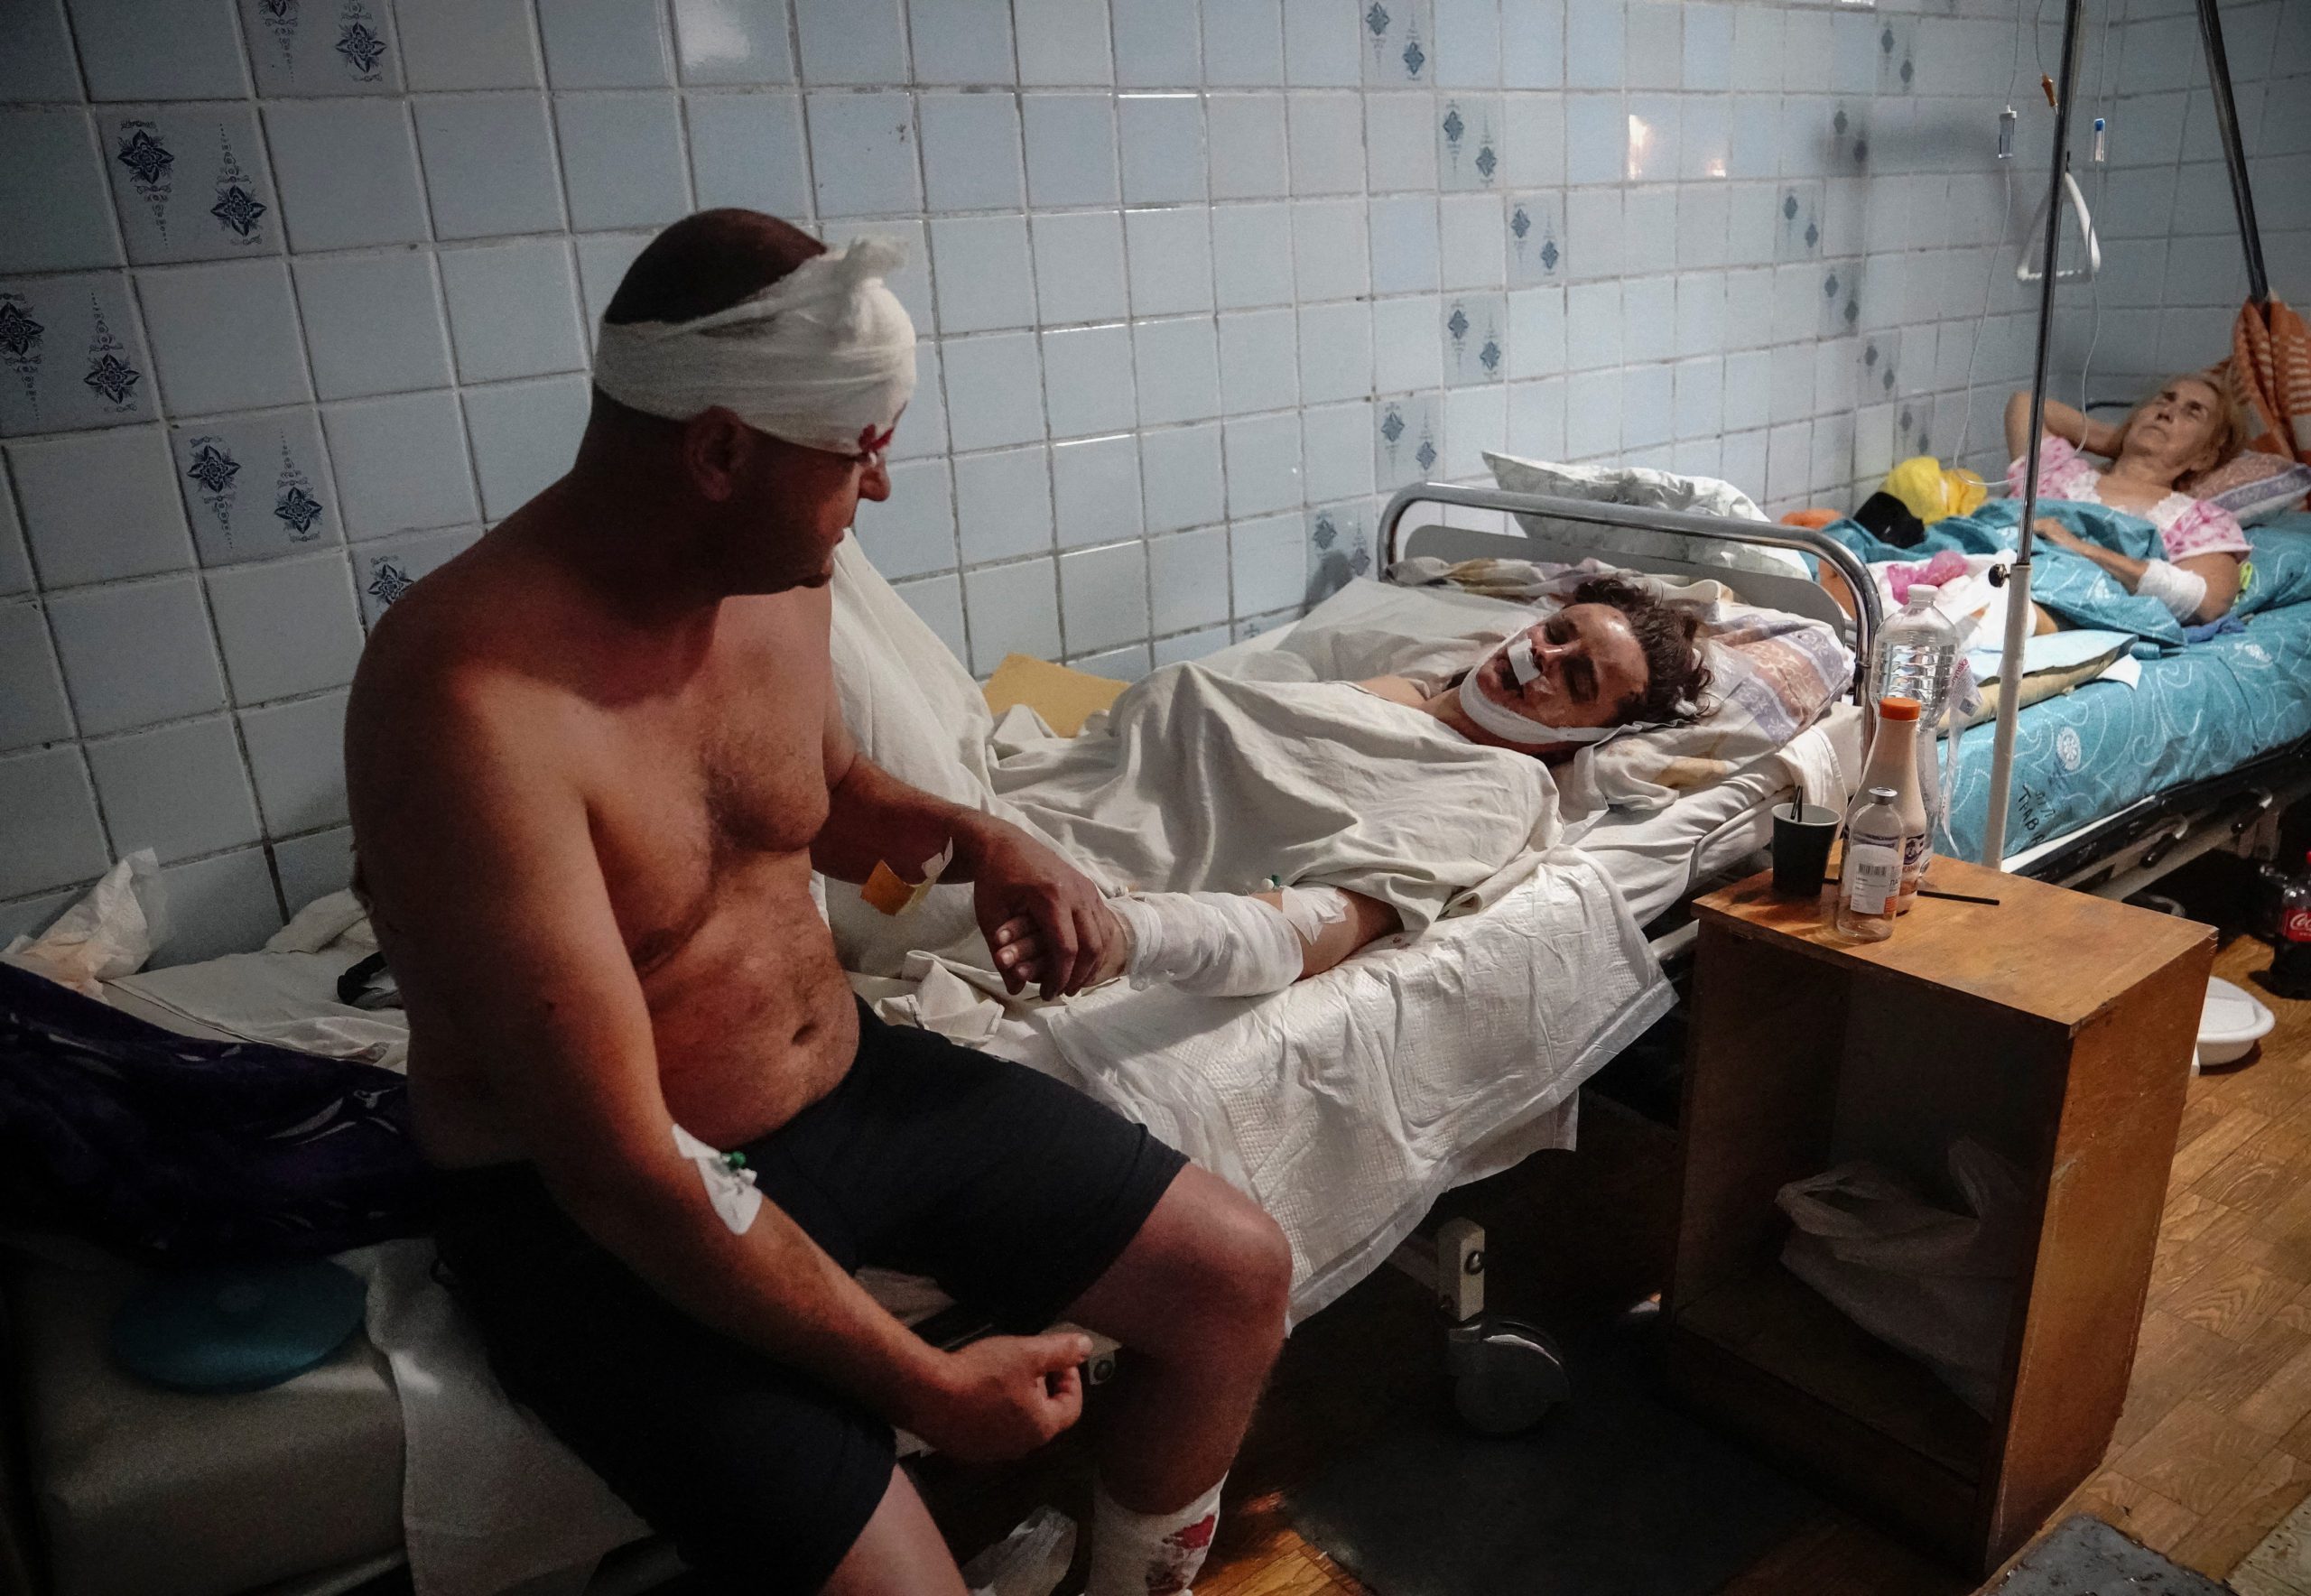 A couple wounded in a shopping mall hit by a Russian missile strike hold hands in a hospital as Russia's attack on Ukraine continues, in Kremenchuk, in Poltava region, Ukraine June 27, 2022. REUTERS/Anna Voitenko